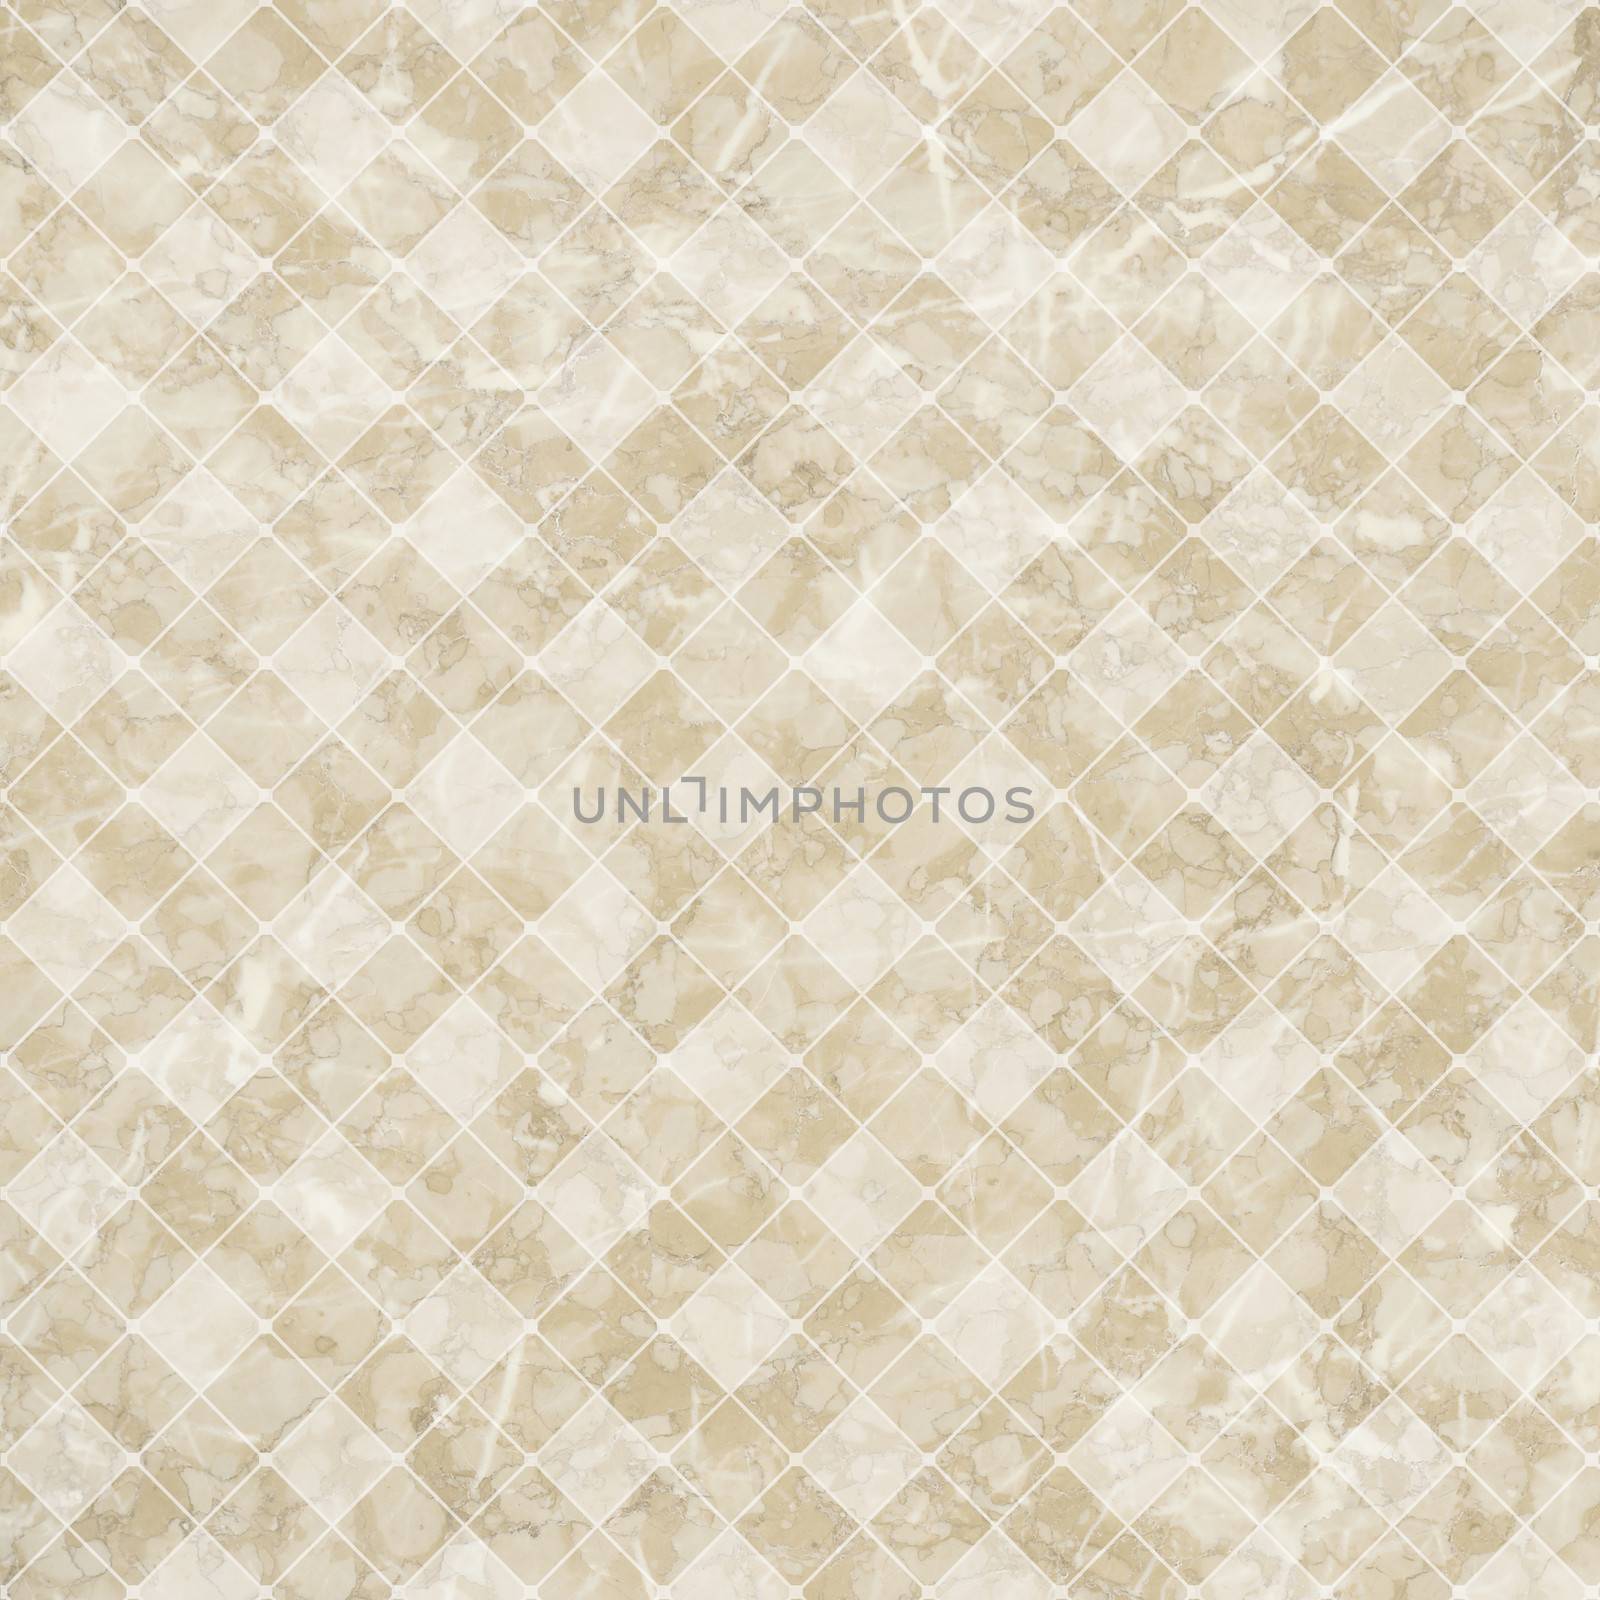 Geometric marble texture. (pattern background.)